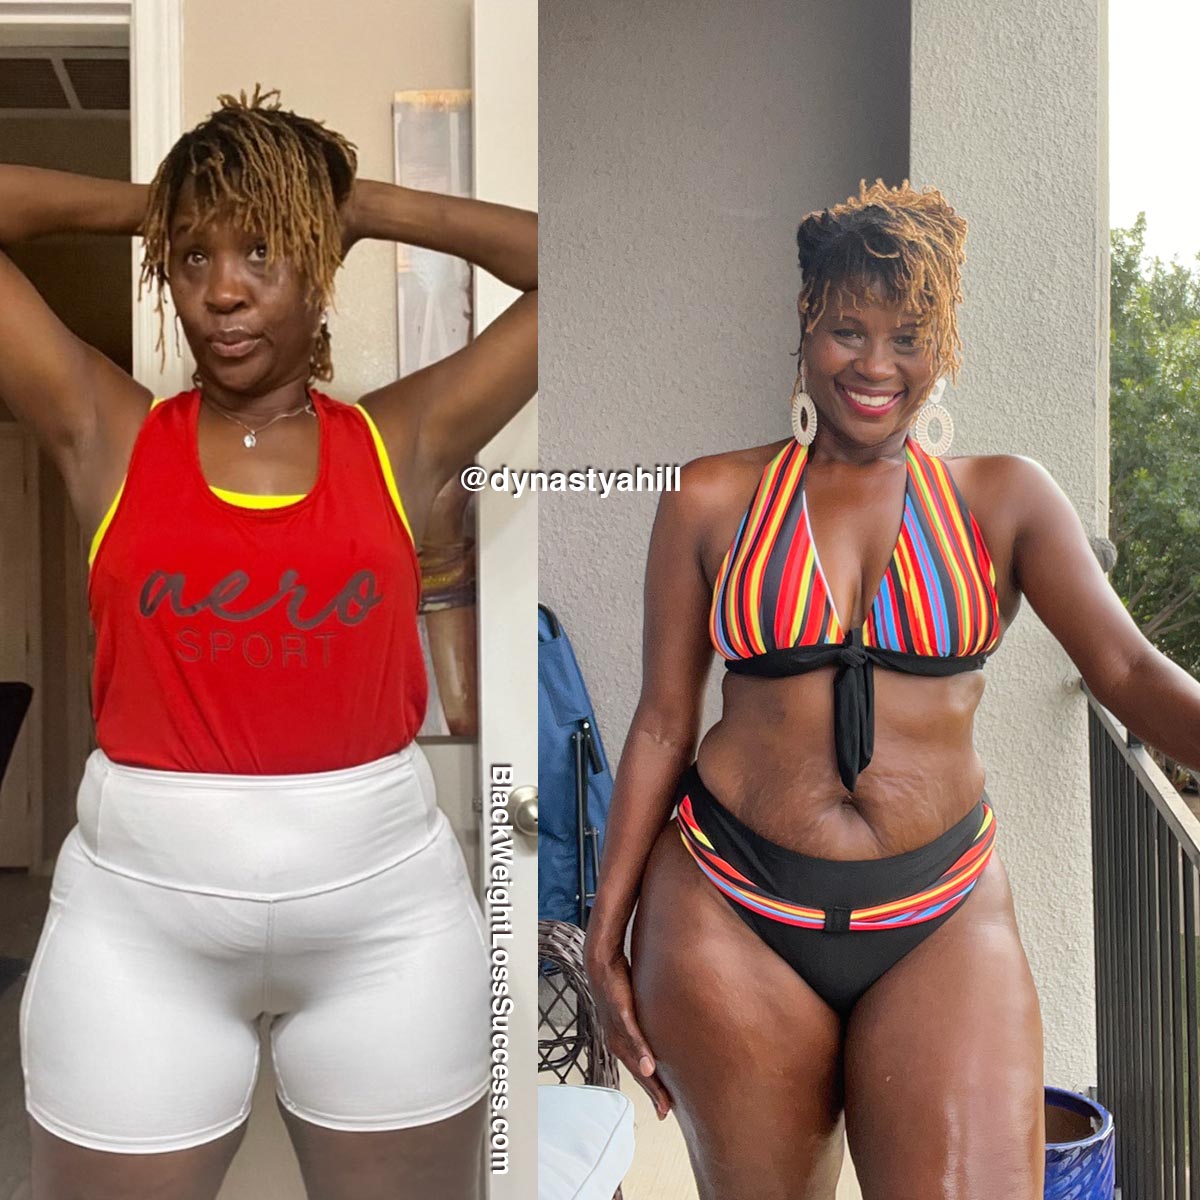 Dynasty before and after weight loss